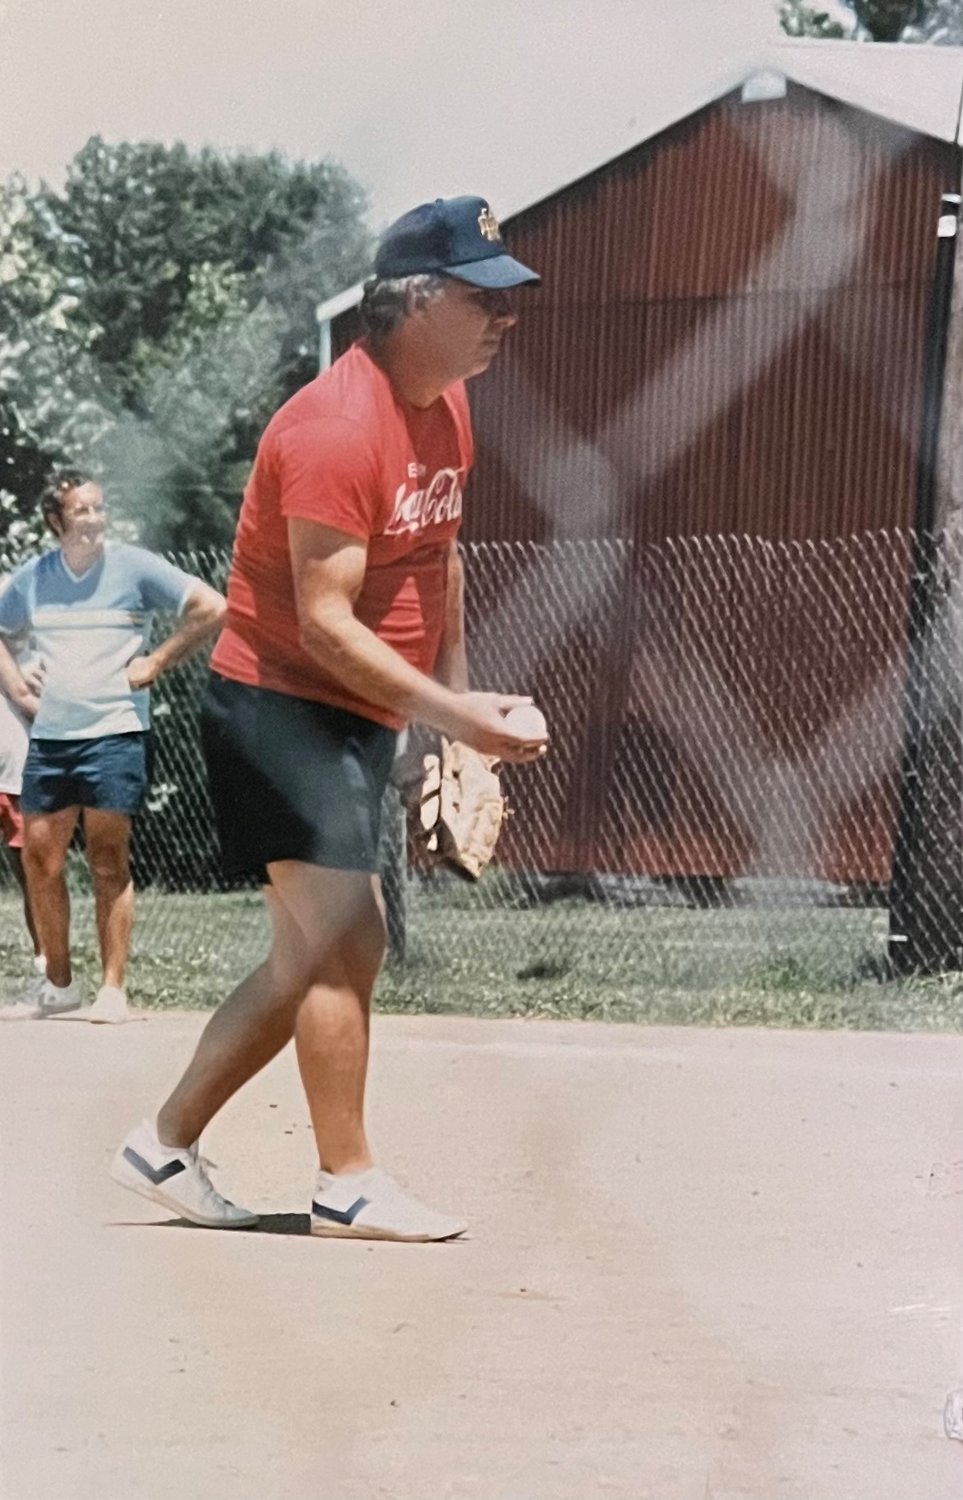 Bill played slow pitch softball back in the day for Booth Machinery.